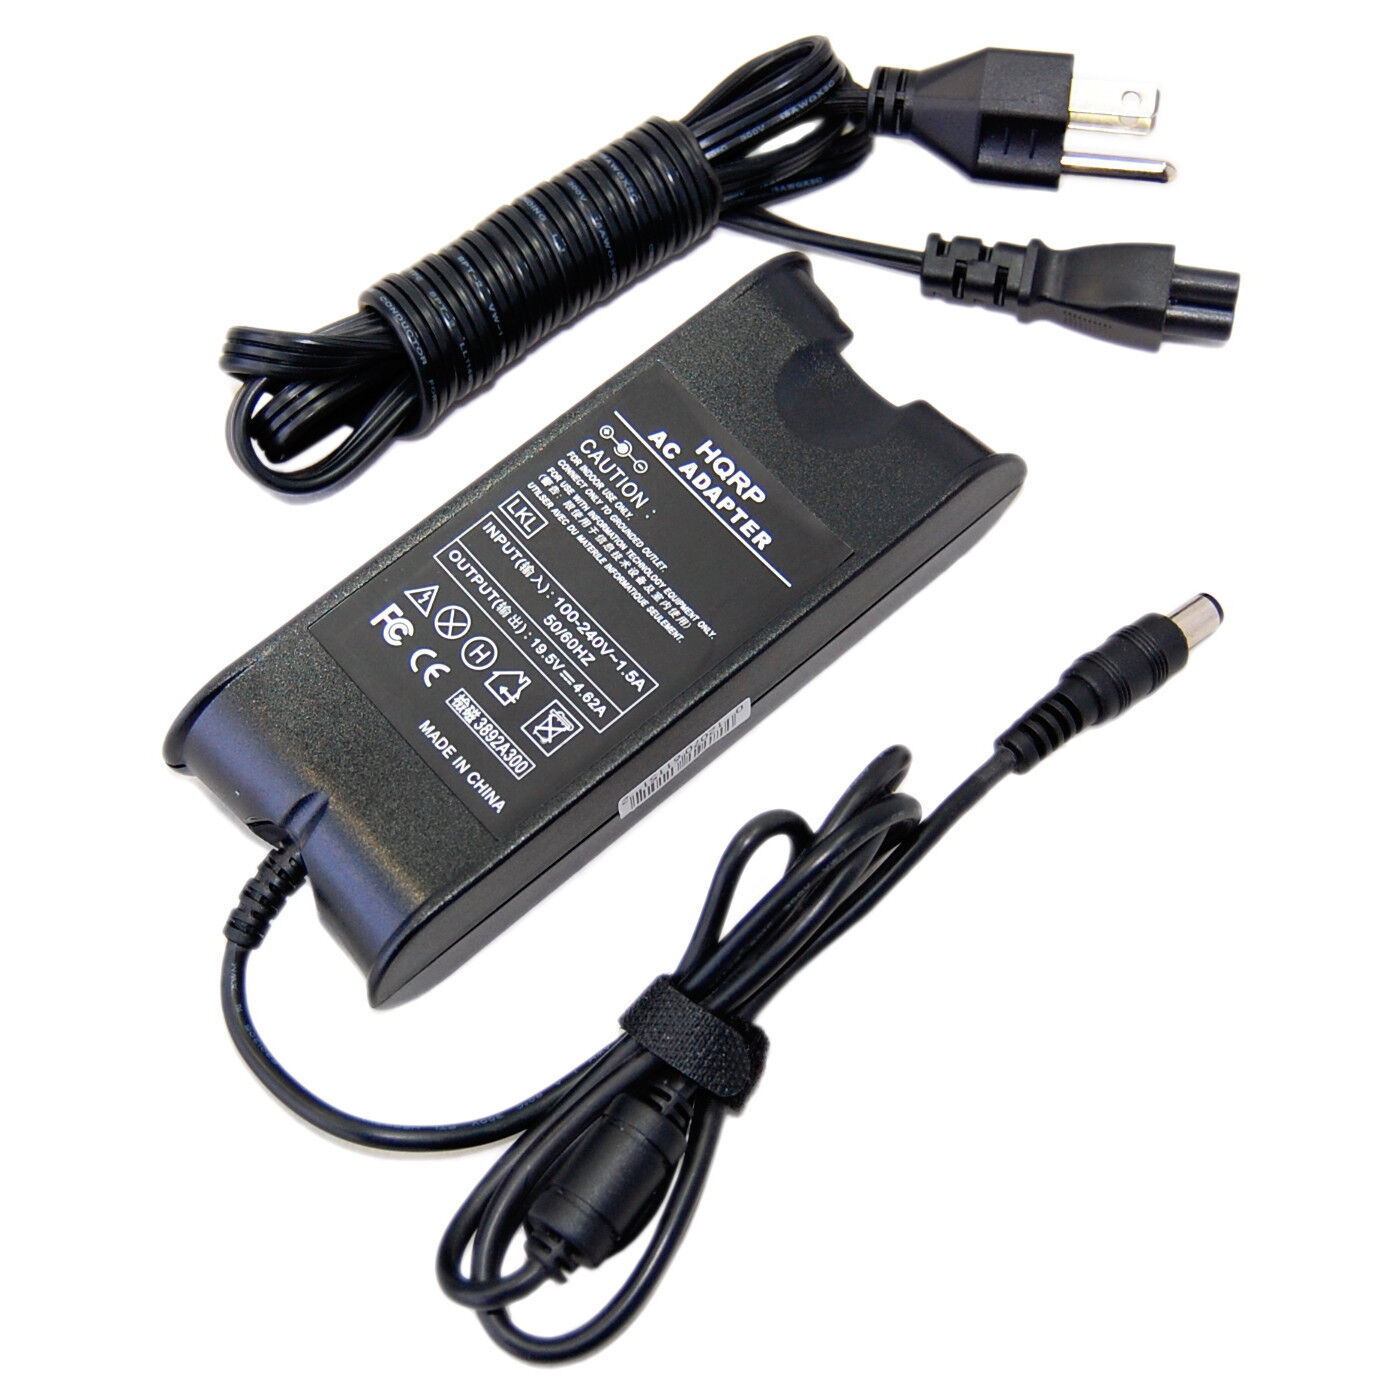 HQRP AC Power Adapter Charger for Dell Studio 17 1737 1735 XPS 16 1640 Laptop